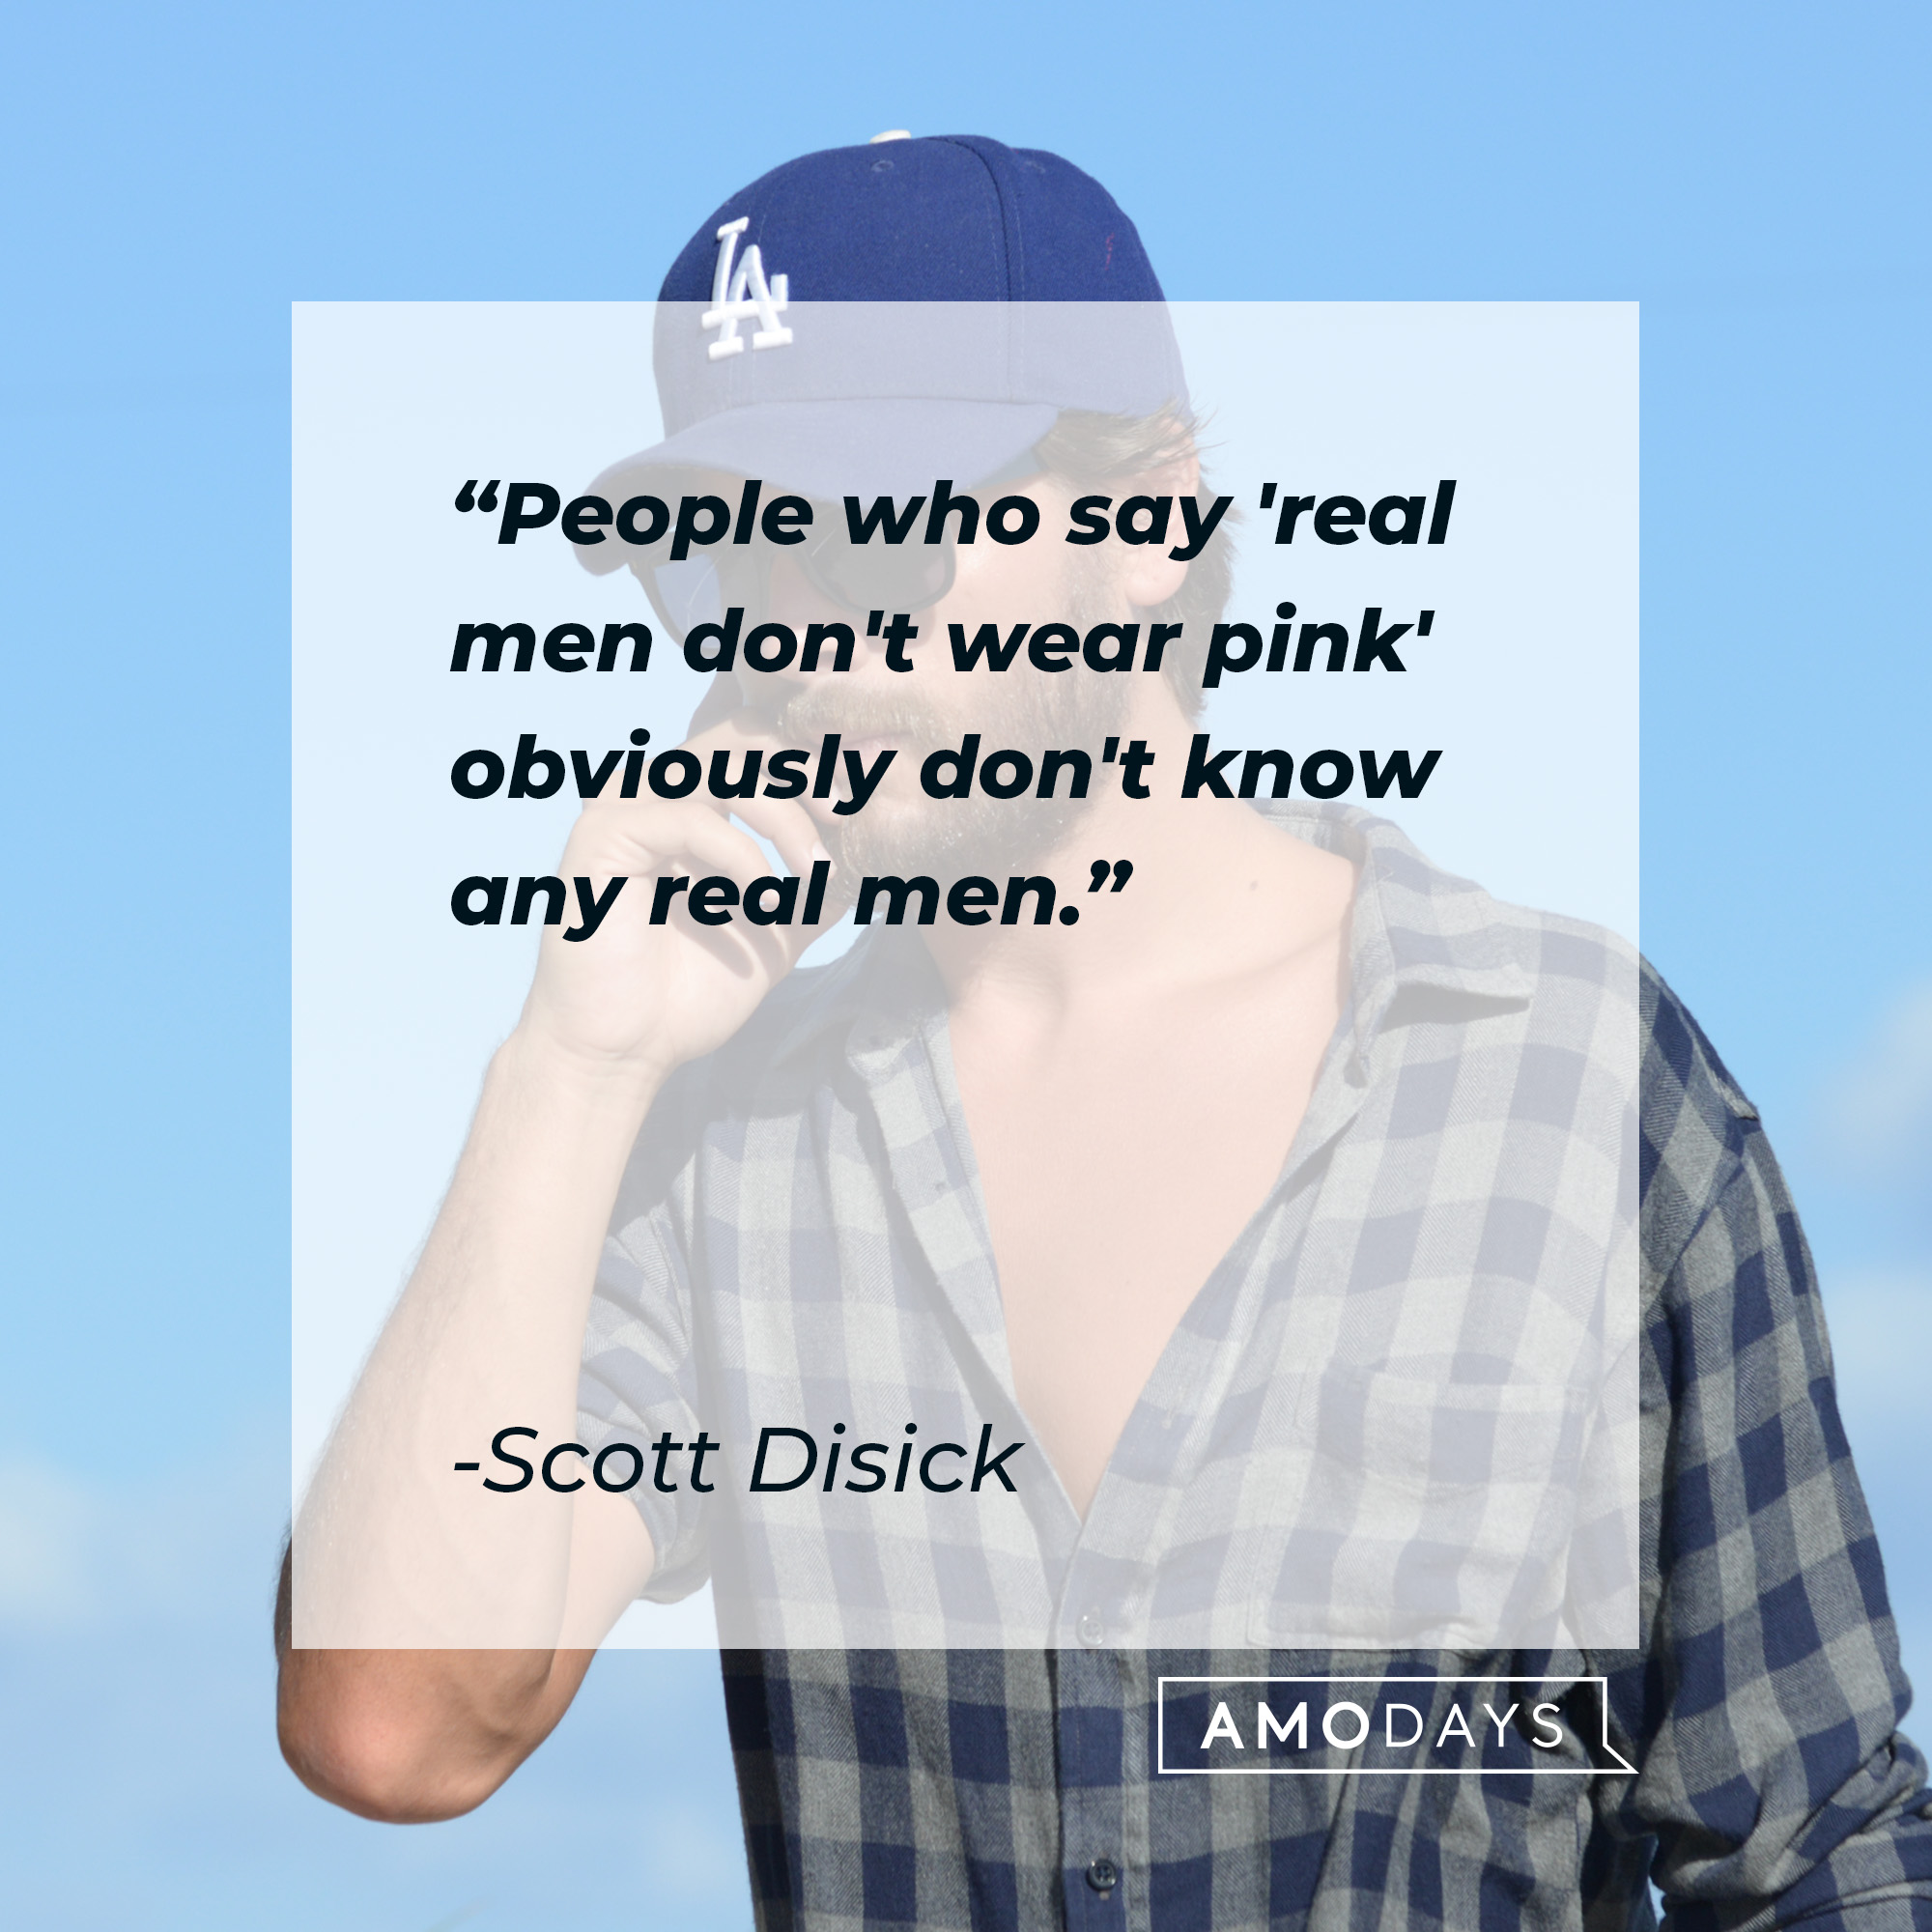 Scott Disick quote: "People who say 'real men don't wear pink' obviously don't know any real men." | Source: Getty Images